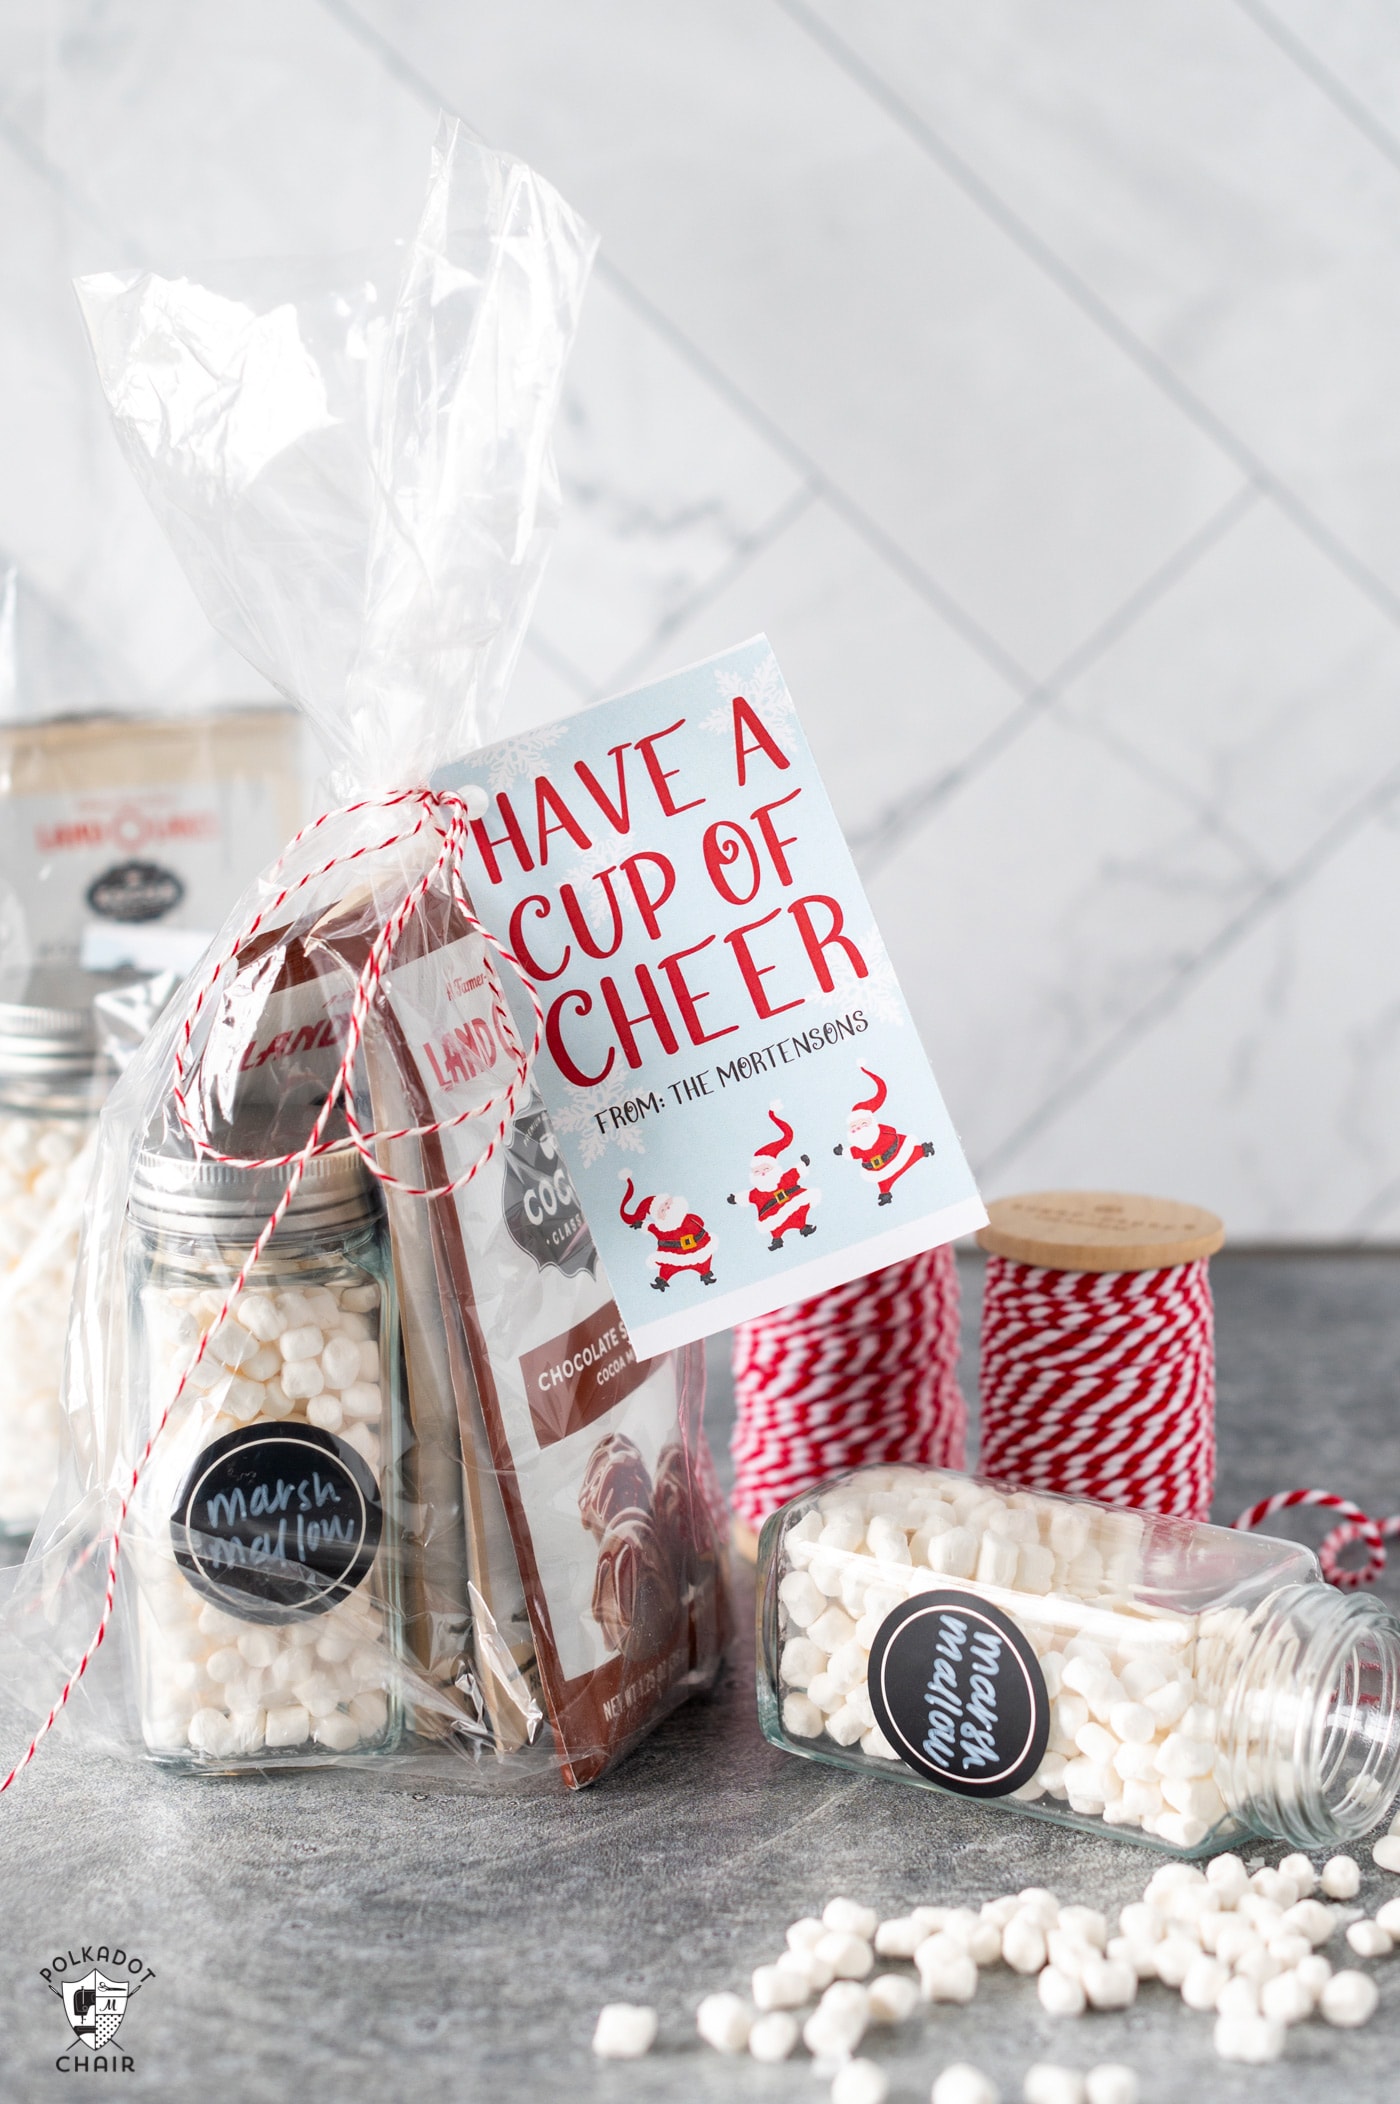 New Neighbor Gift Ideas - Gift Basket Goodies To Give Your New Neighbor